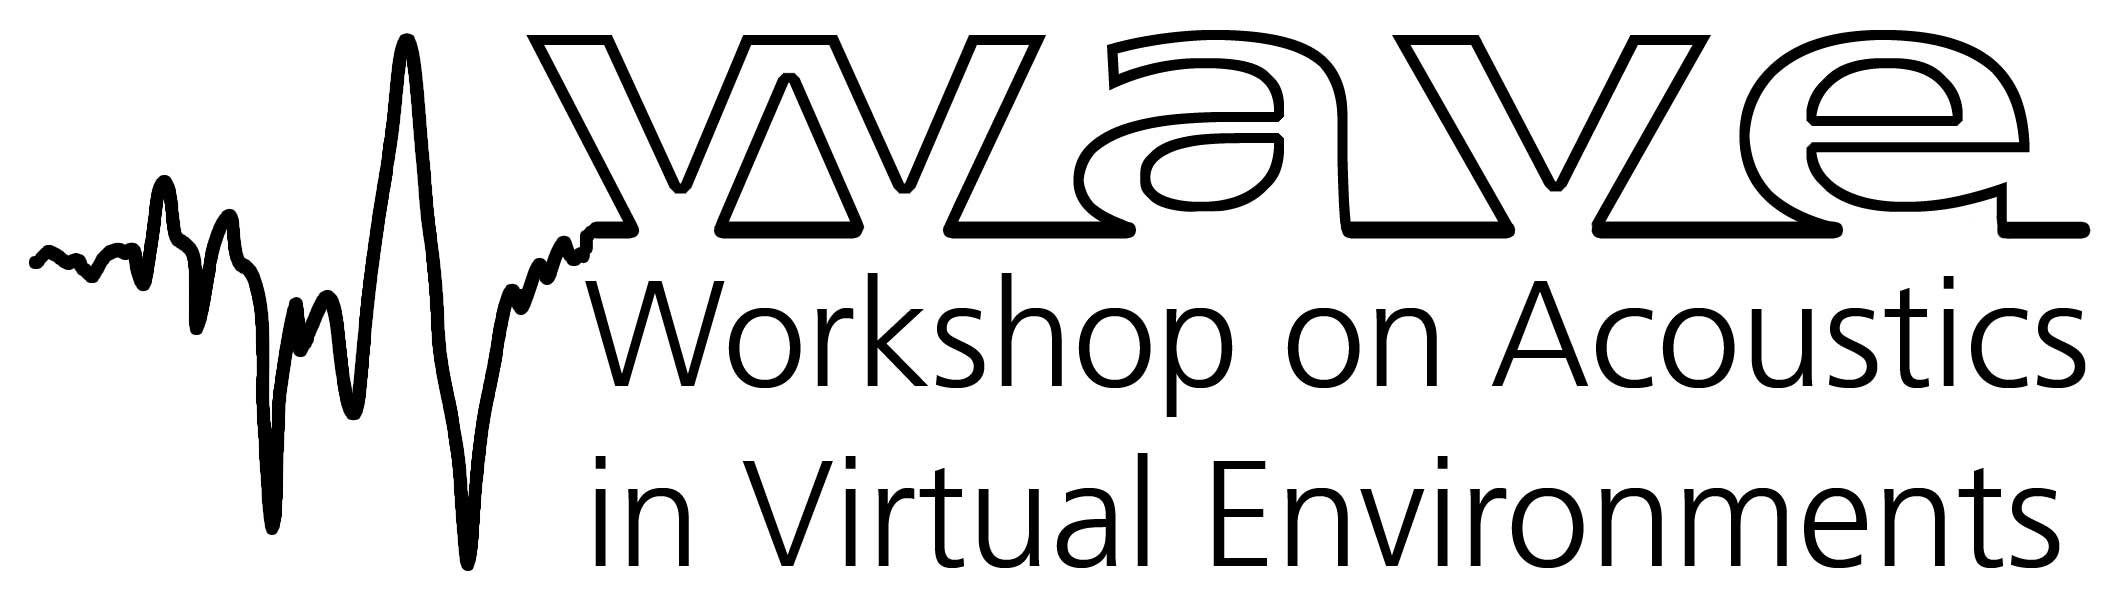 Workshop on Acoustics in Virtual Environments WAVE 2016